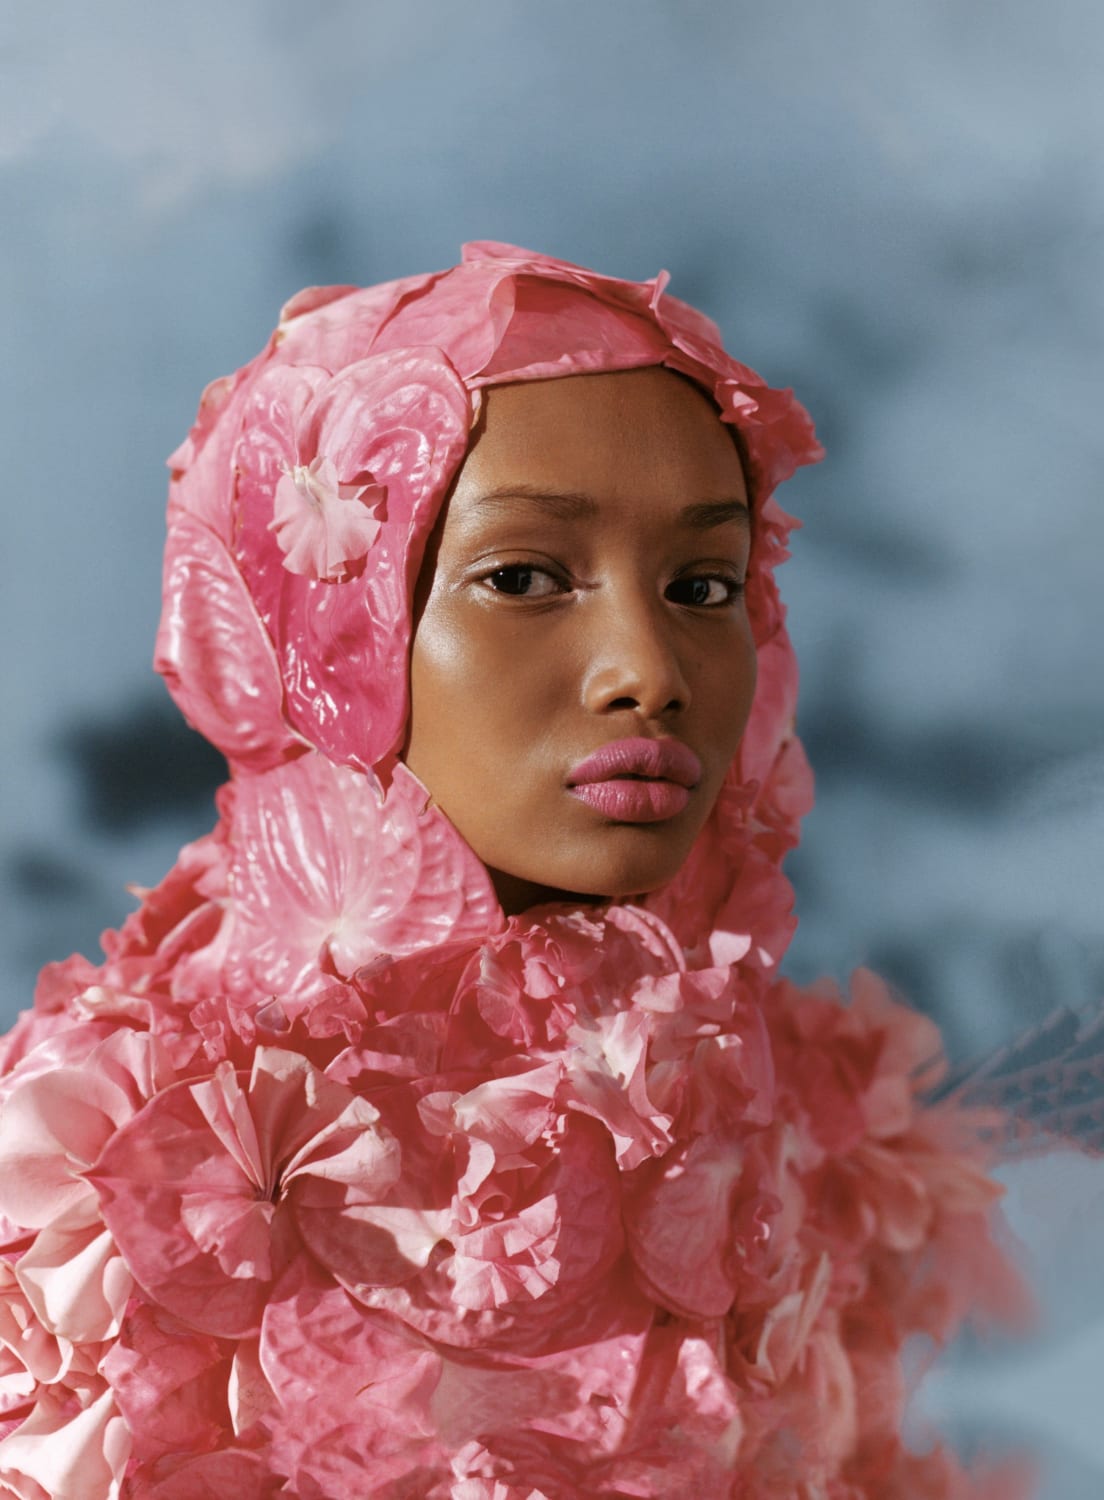 'To convey black beauty is an act of justice': Tasweer photo festival – in pictures